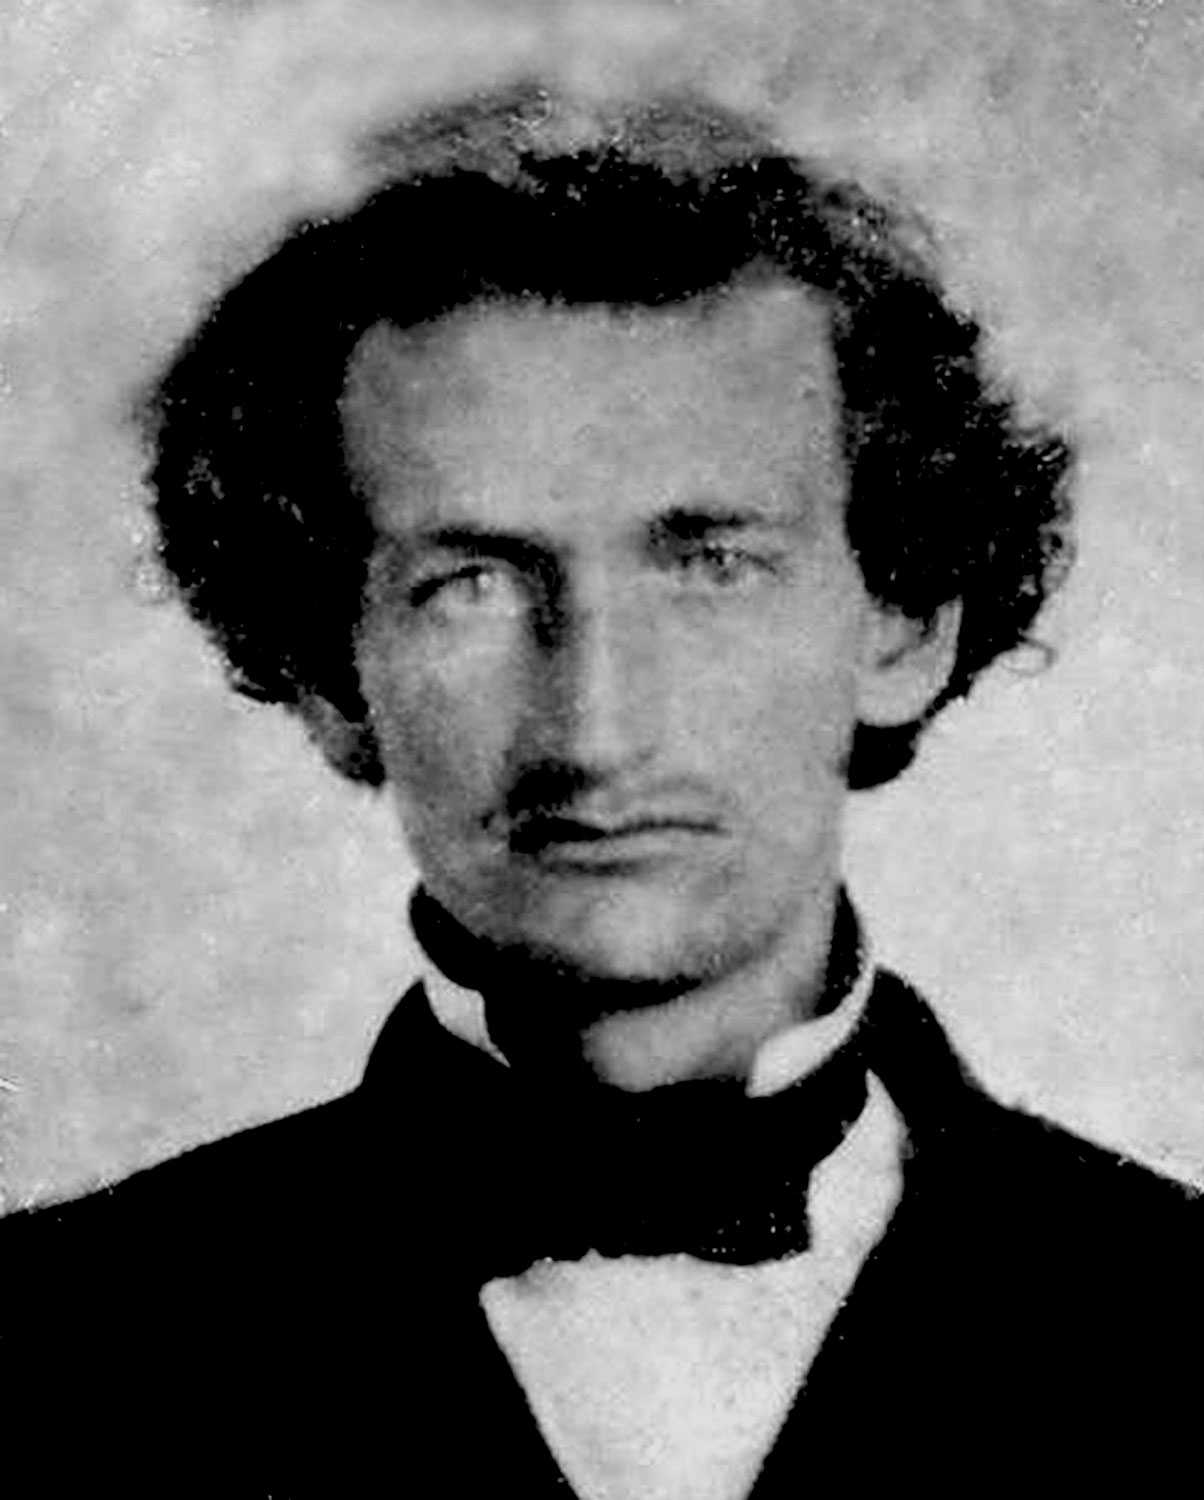 A blurry and close portrait of James M. Hinds. He is wearing a black tux and has curly hair.